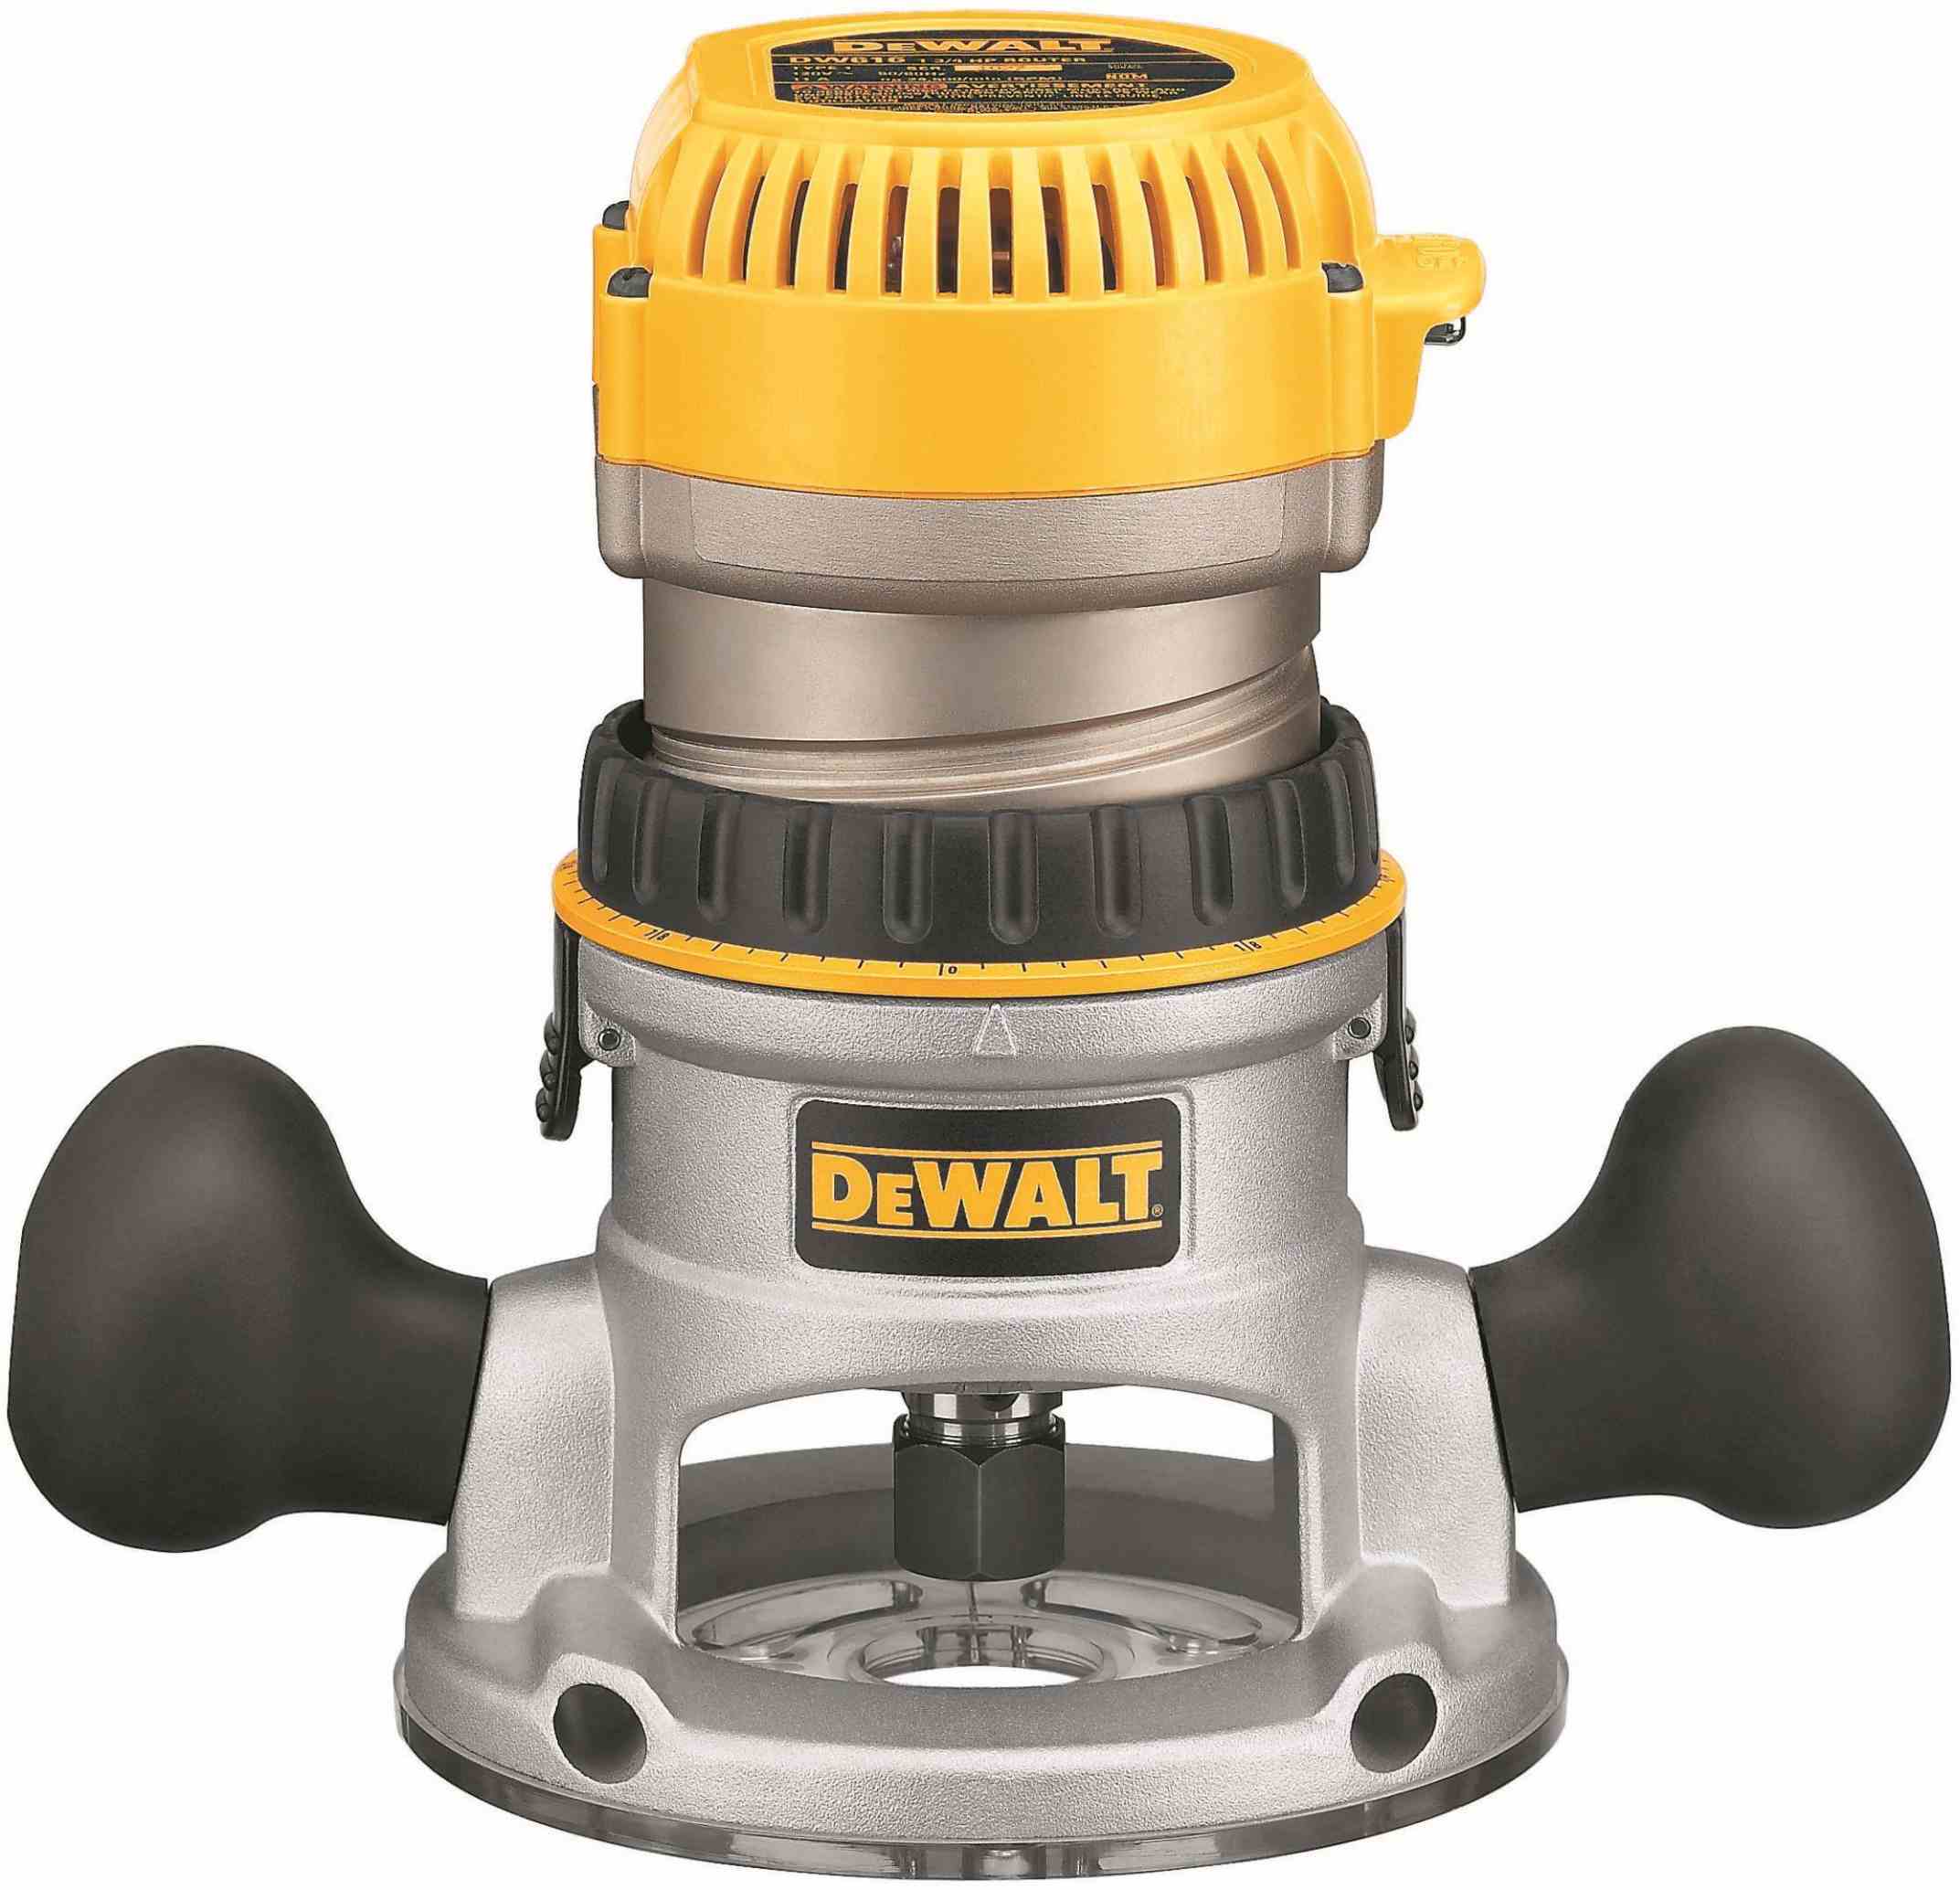 DeWalt DW616 1-3/4 HP Fixed Base Router The Tool Nut